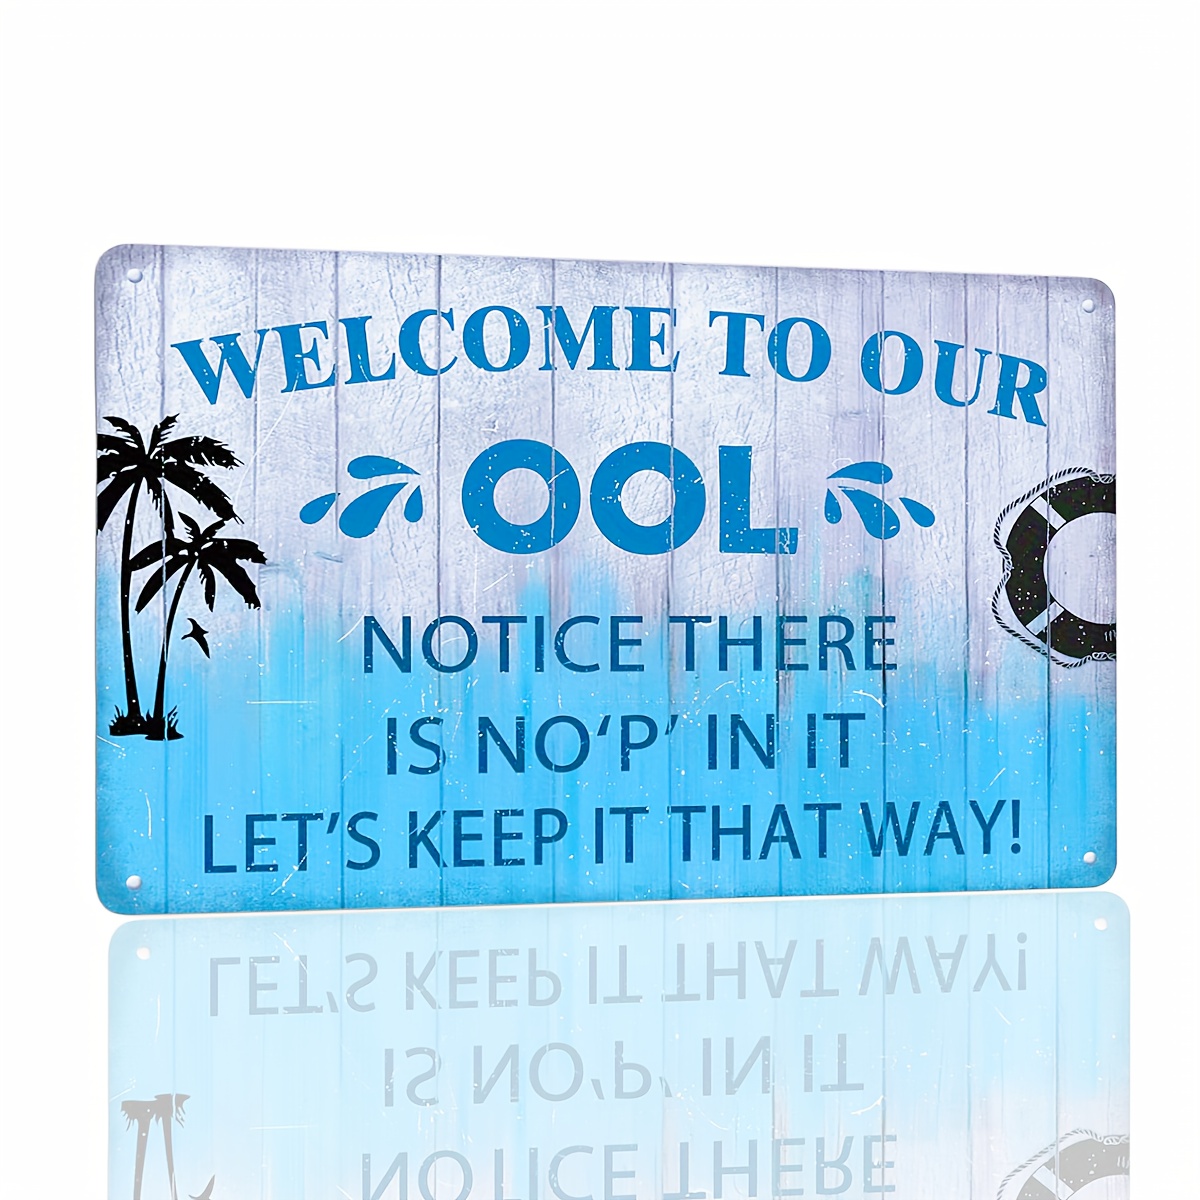 

1pc, "welcome To Our Ool" Funny Metal Tin Sign (12x8 Inches/30x20cm), Vintage Pool Rules Decorative Poster, No Pee Humor, Swimming Pool Deck & Backyard Wall Decor, Outdoor Pool Area Decoration